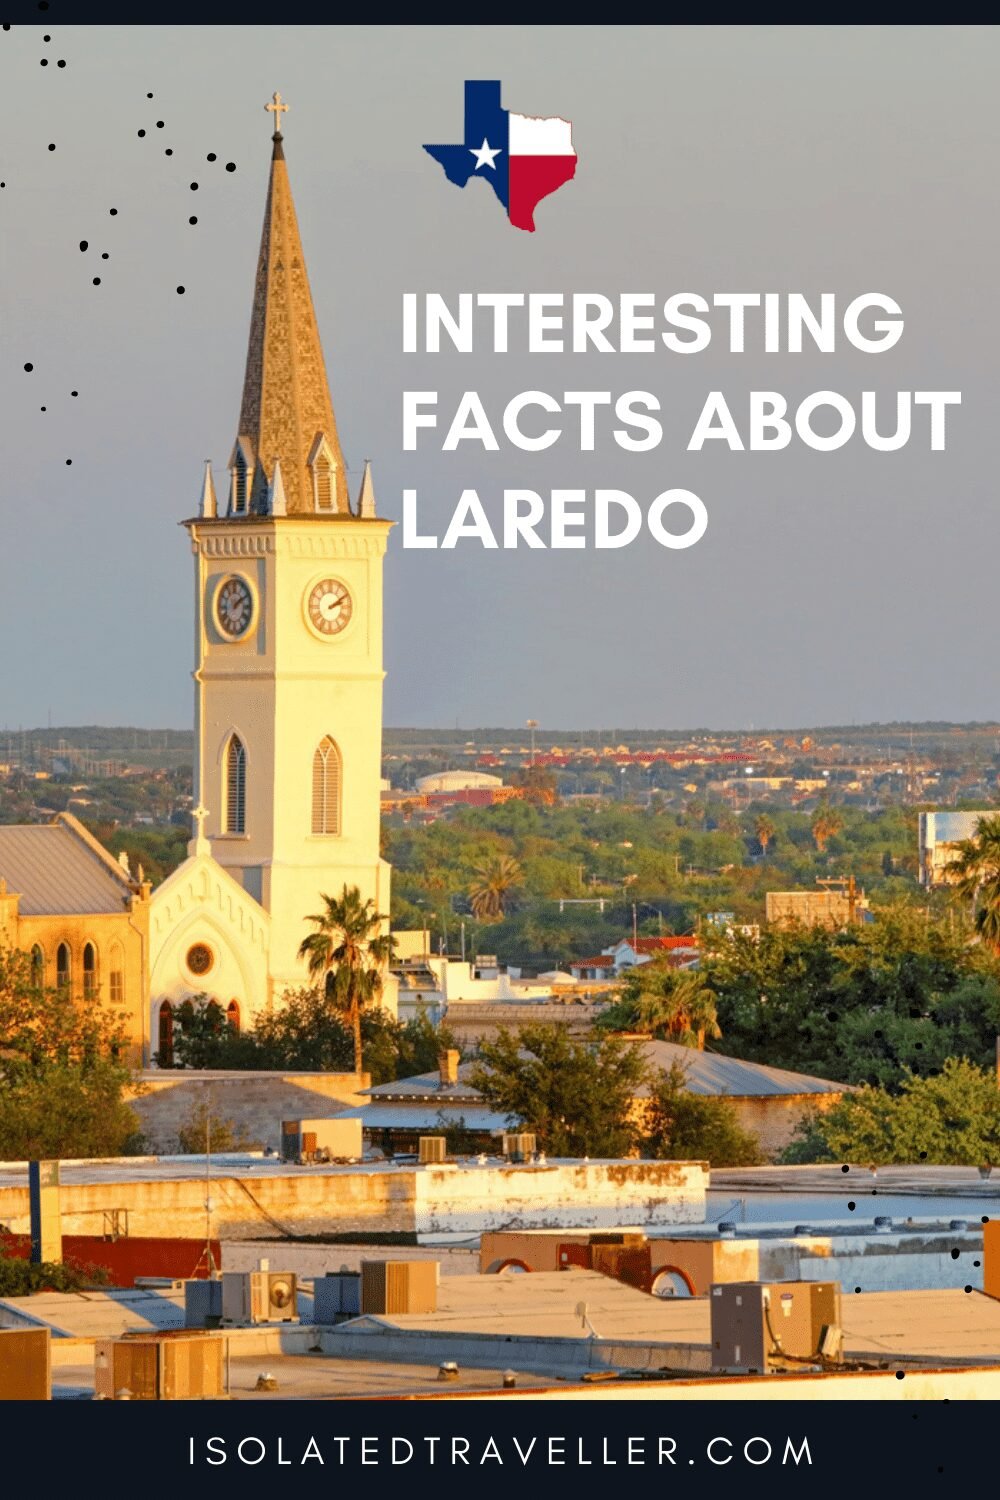 Facts About Laredo